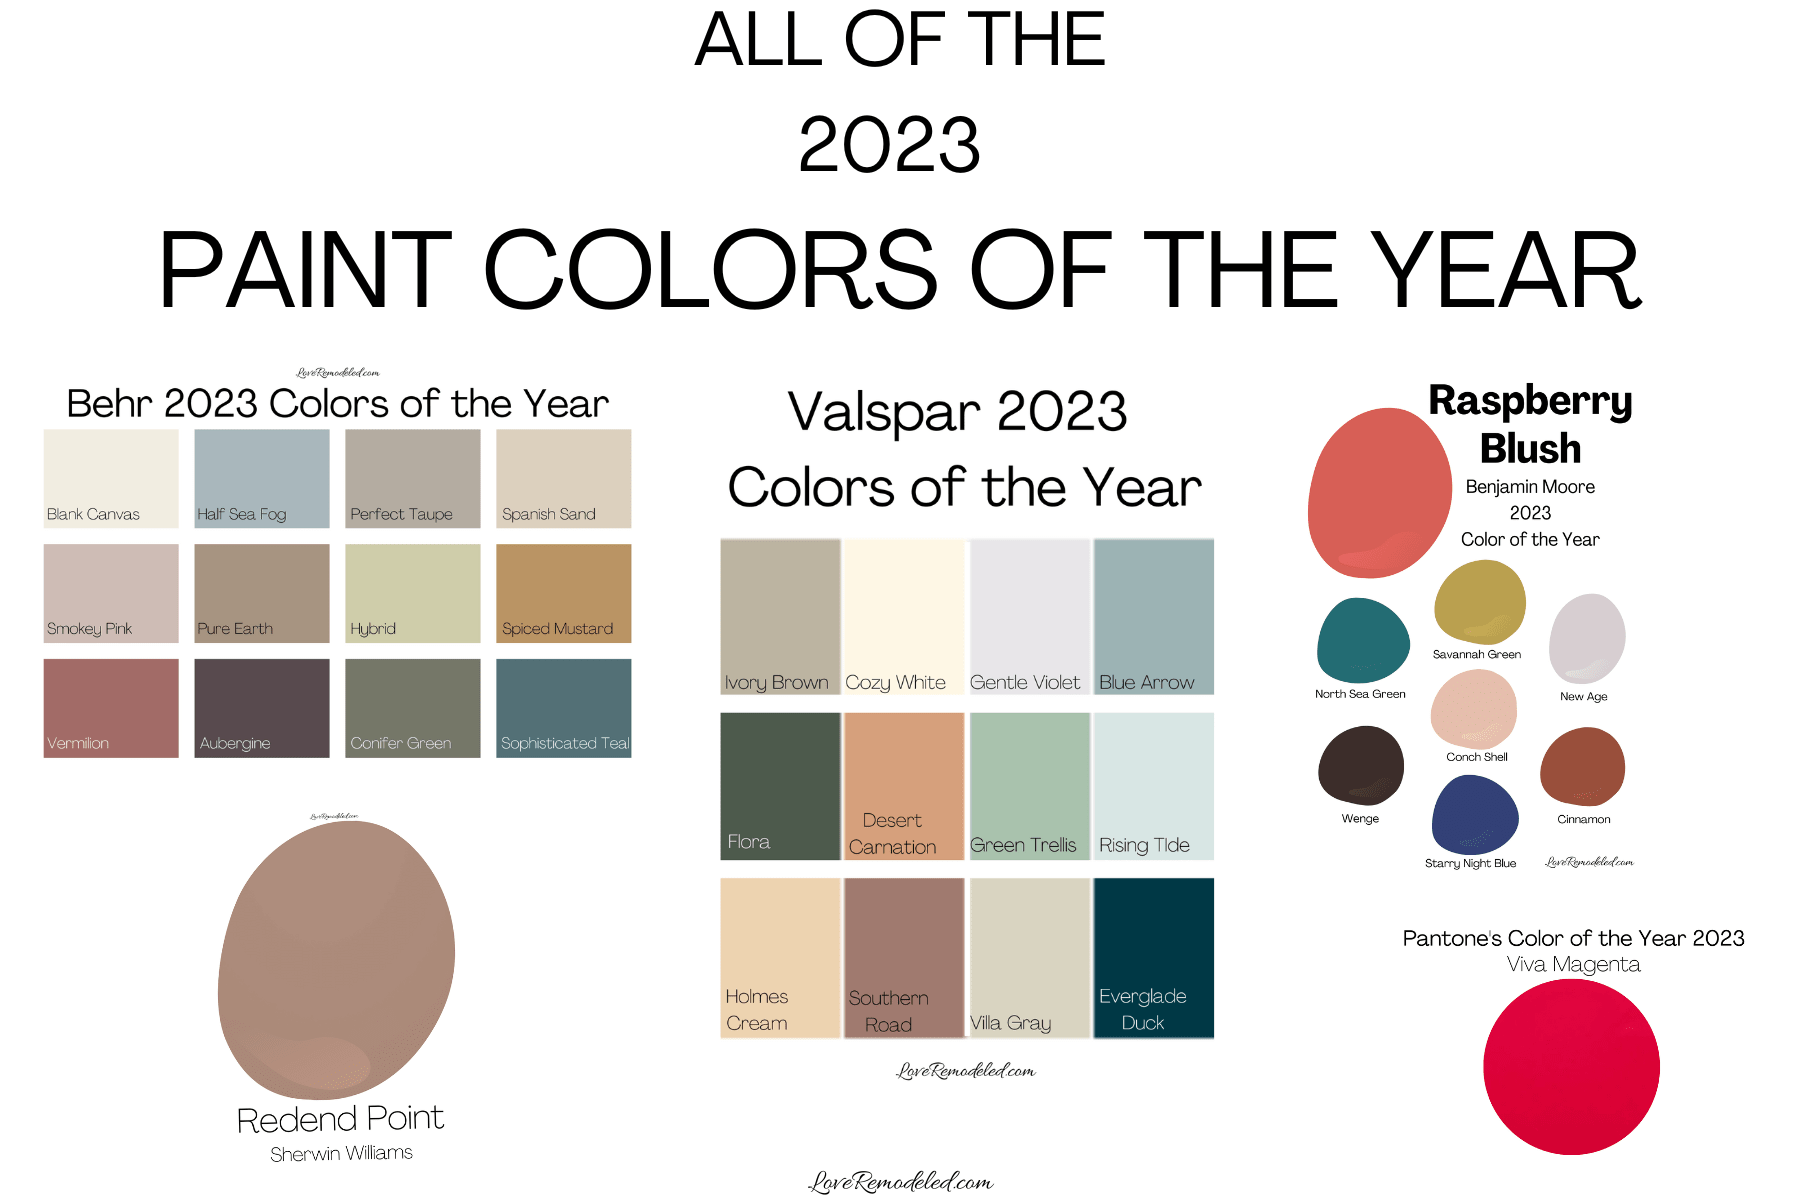 Paint Color Predictions for 2023